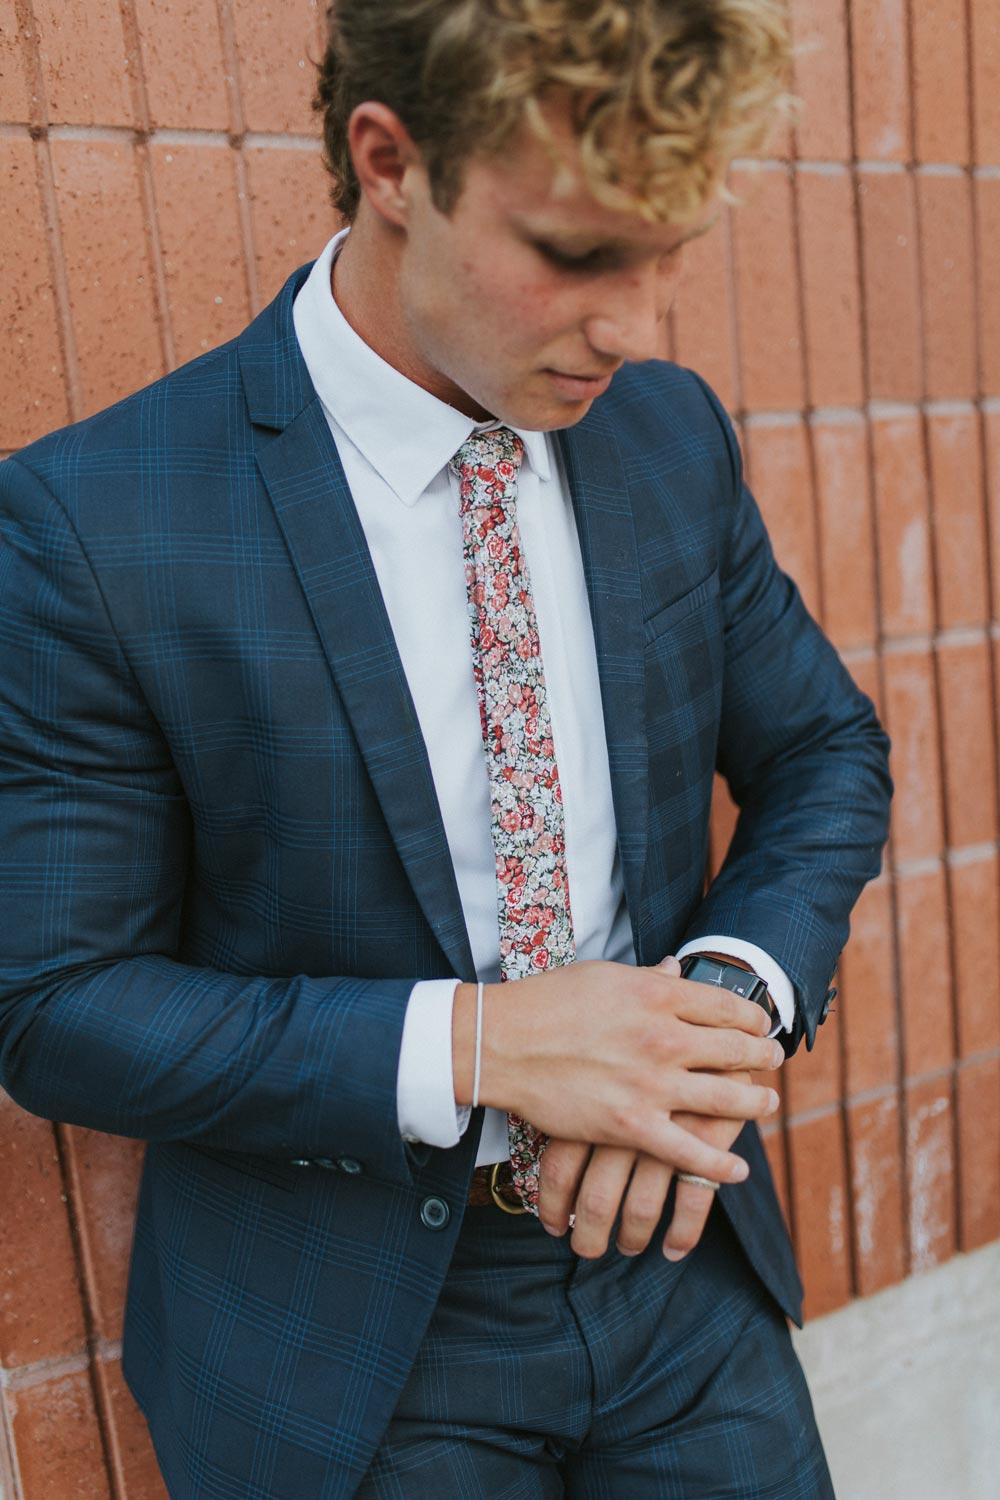 Bed of Roses tie worn with a white shirt and blue suit jacket.